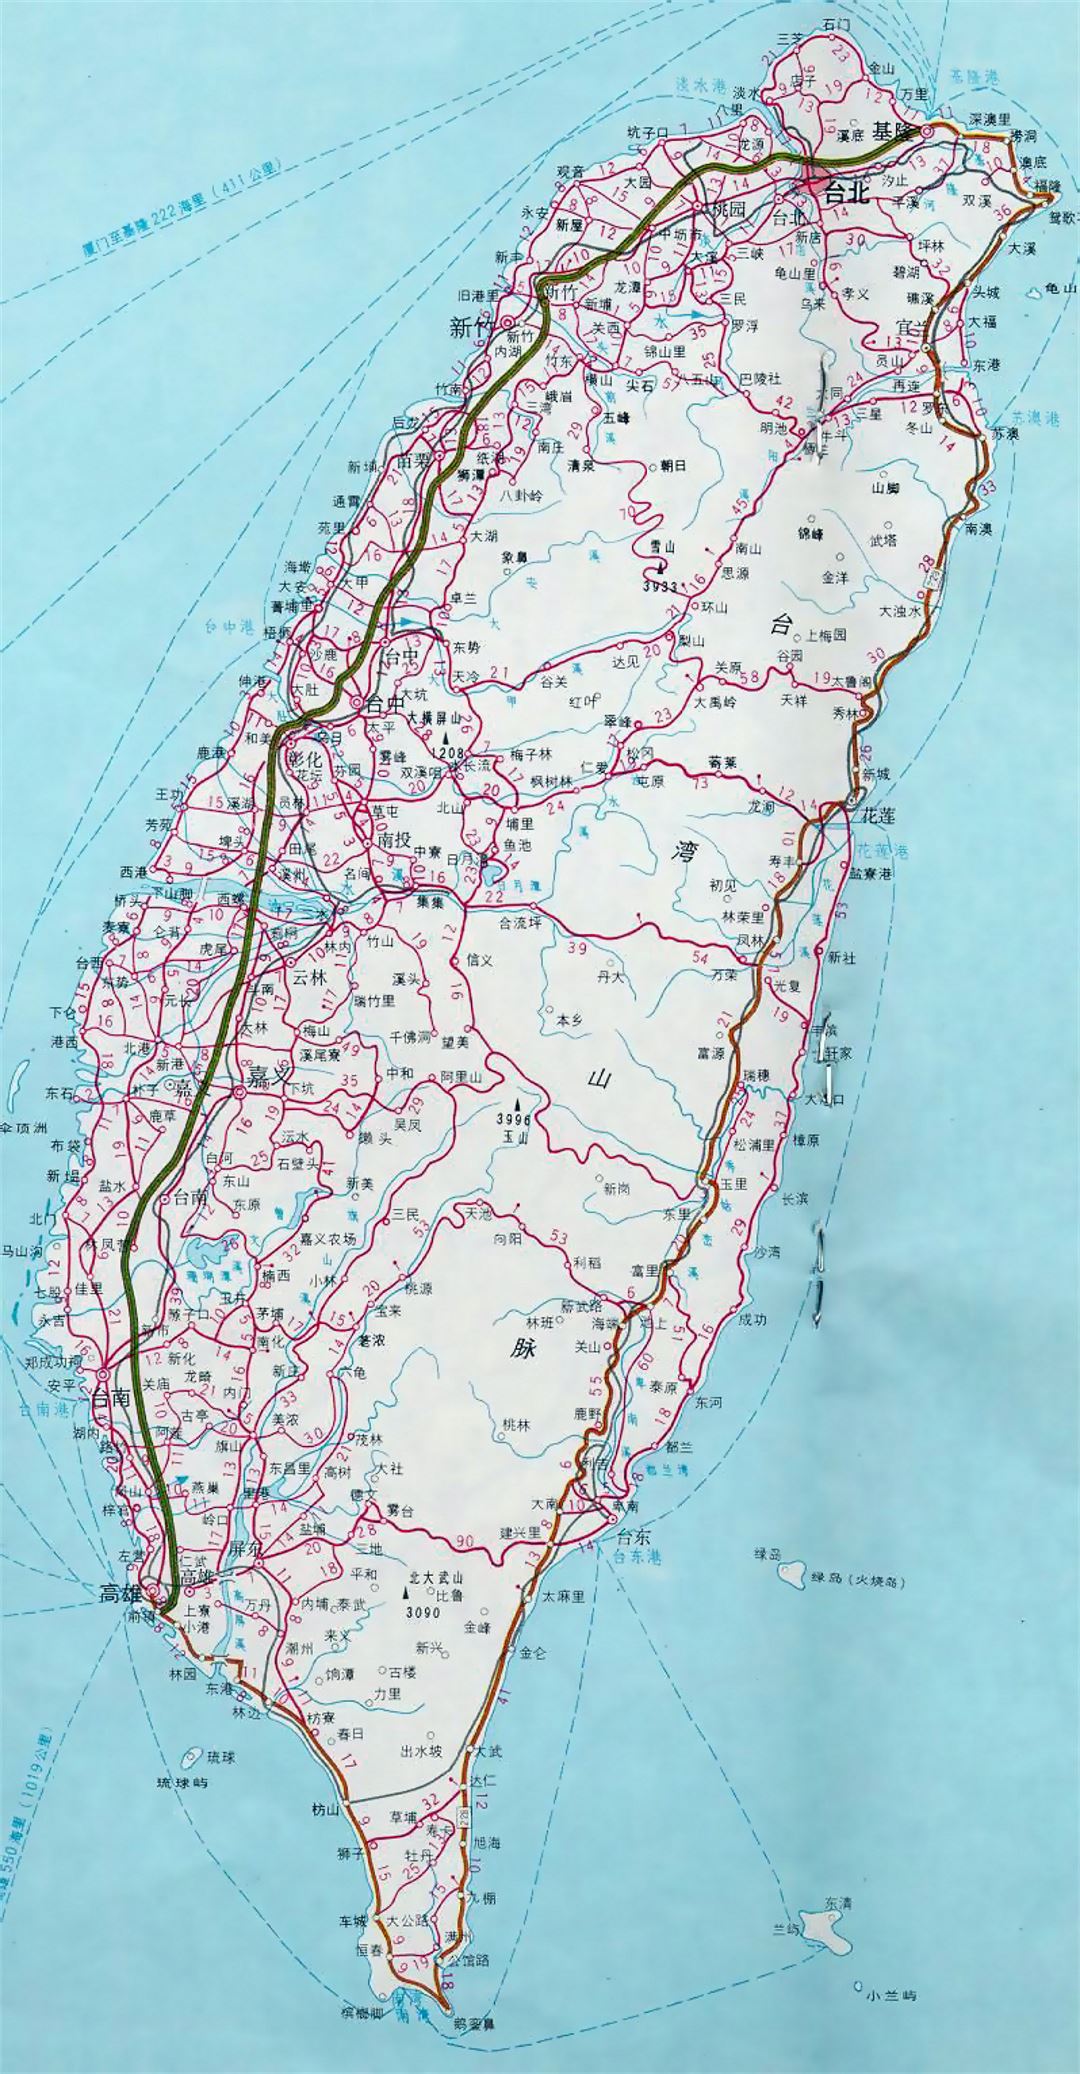 Detailed map of Taiwan with roads and cities